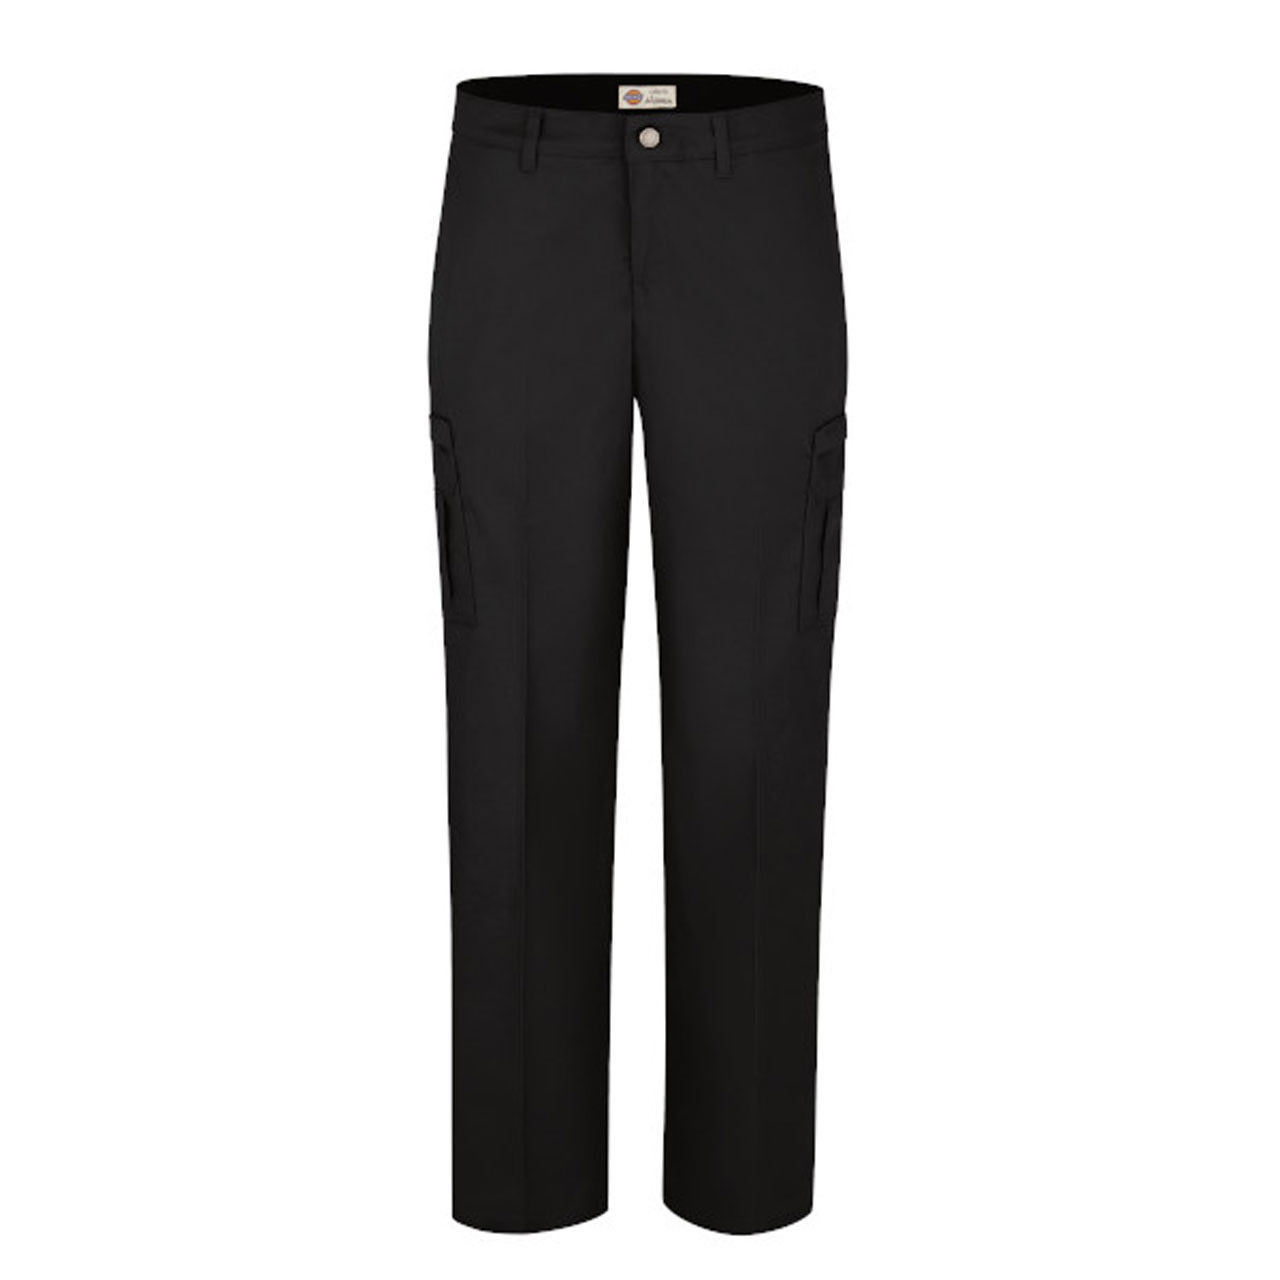 Do black Dickies cargo pants for women feature easy care stain release?